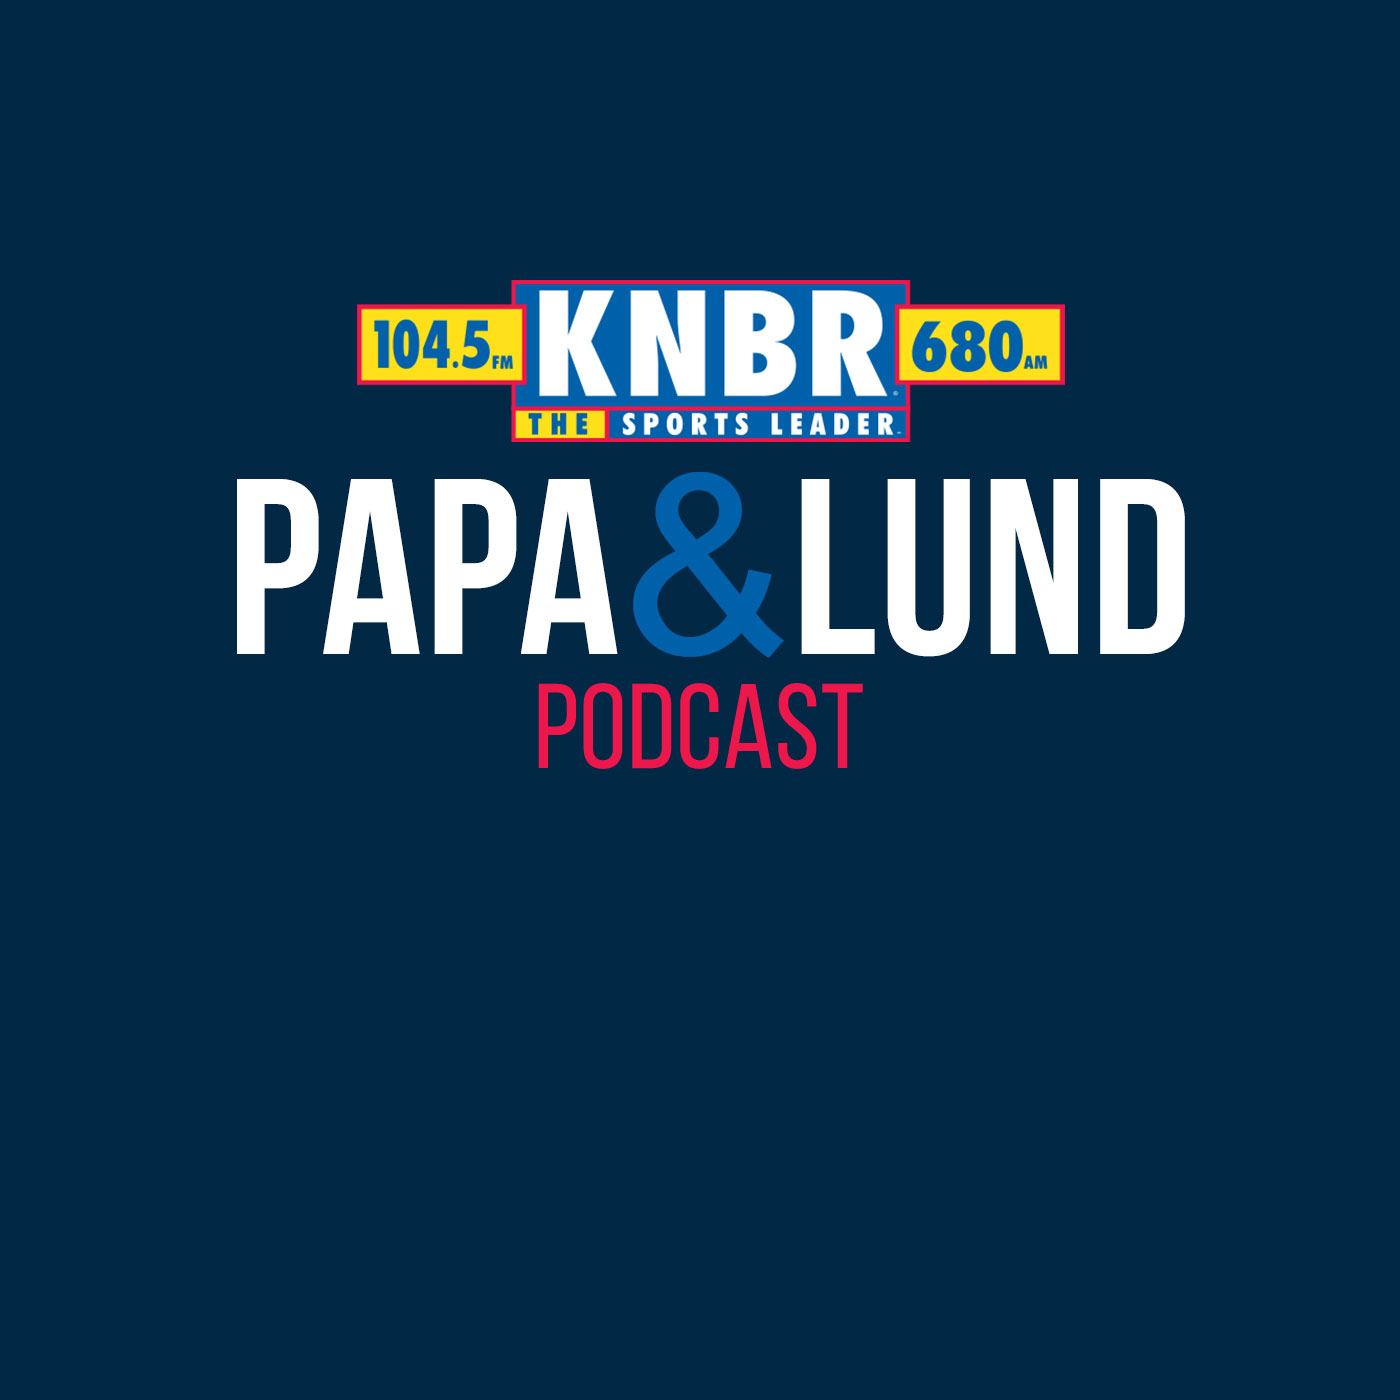 3-1 Clifford Ray joins Papa & Lund to discuss the Warriors recent success & how they stack up against the Elite in the Western Conference